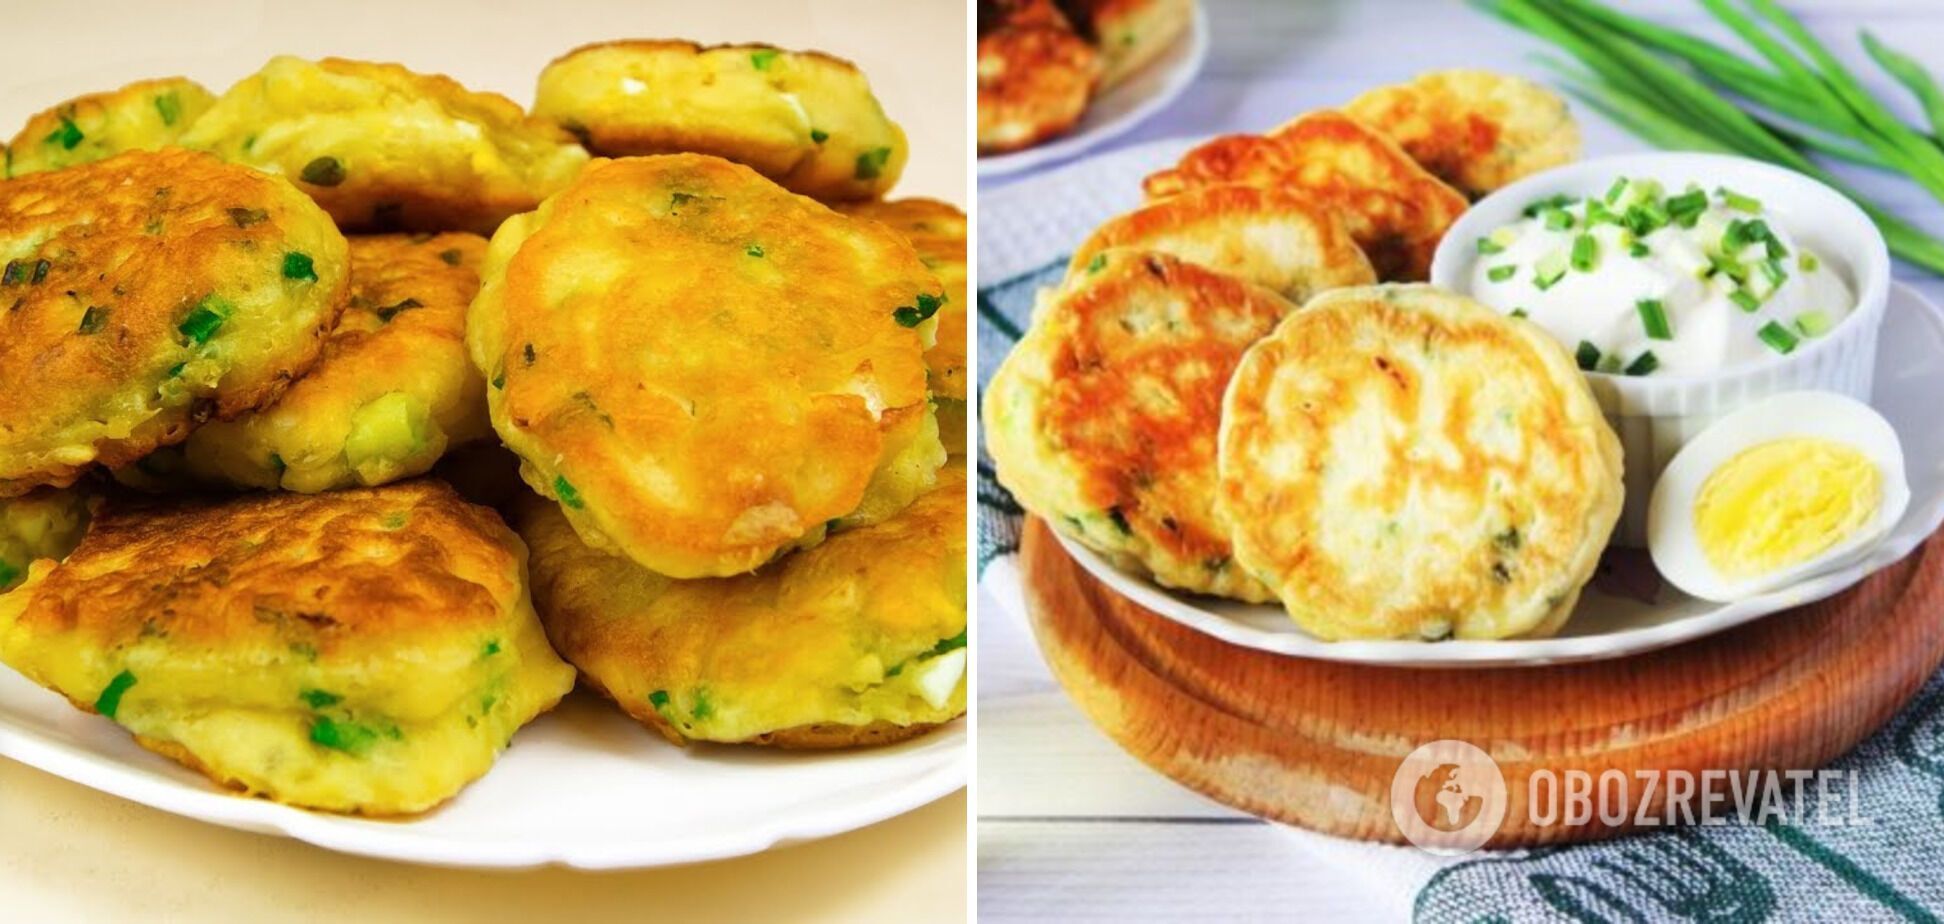 Egg and onion fritters for a snack